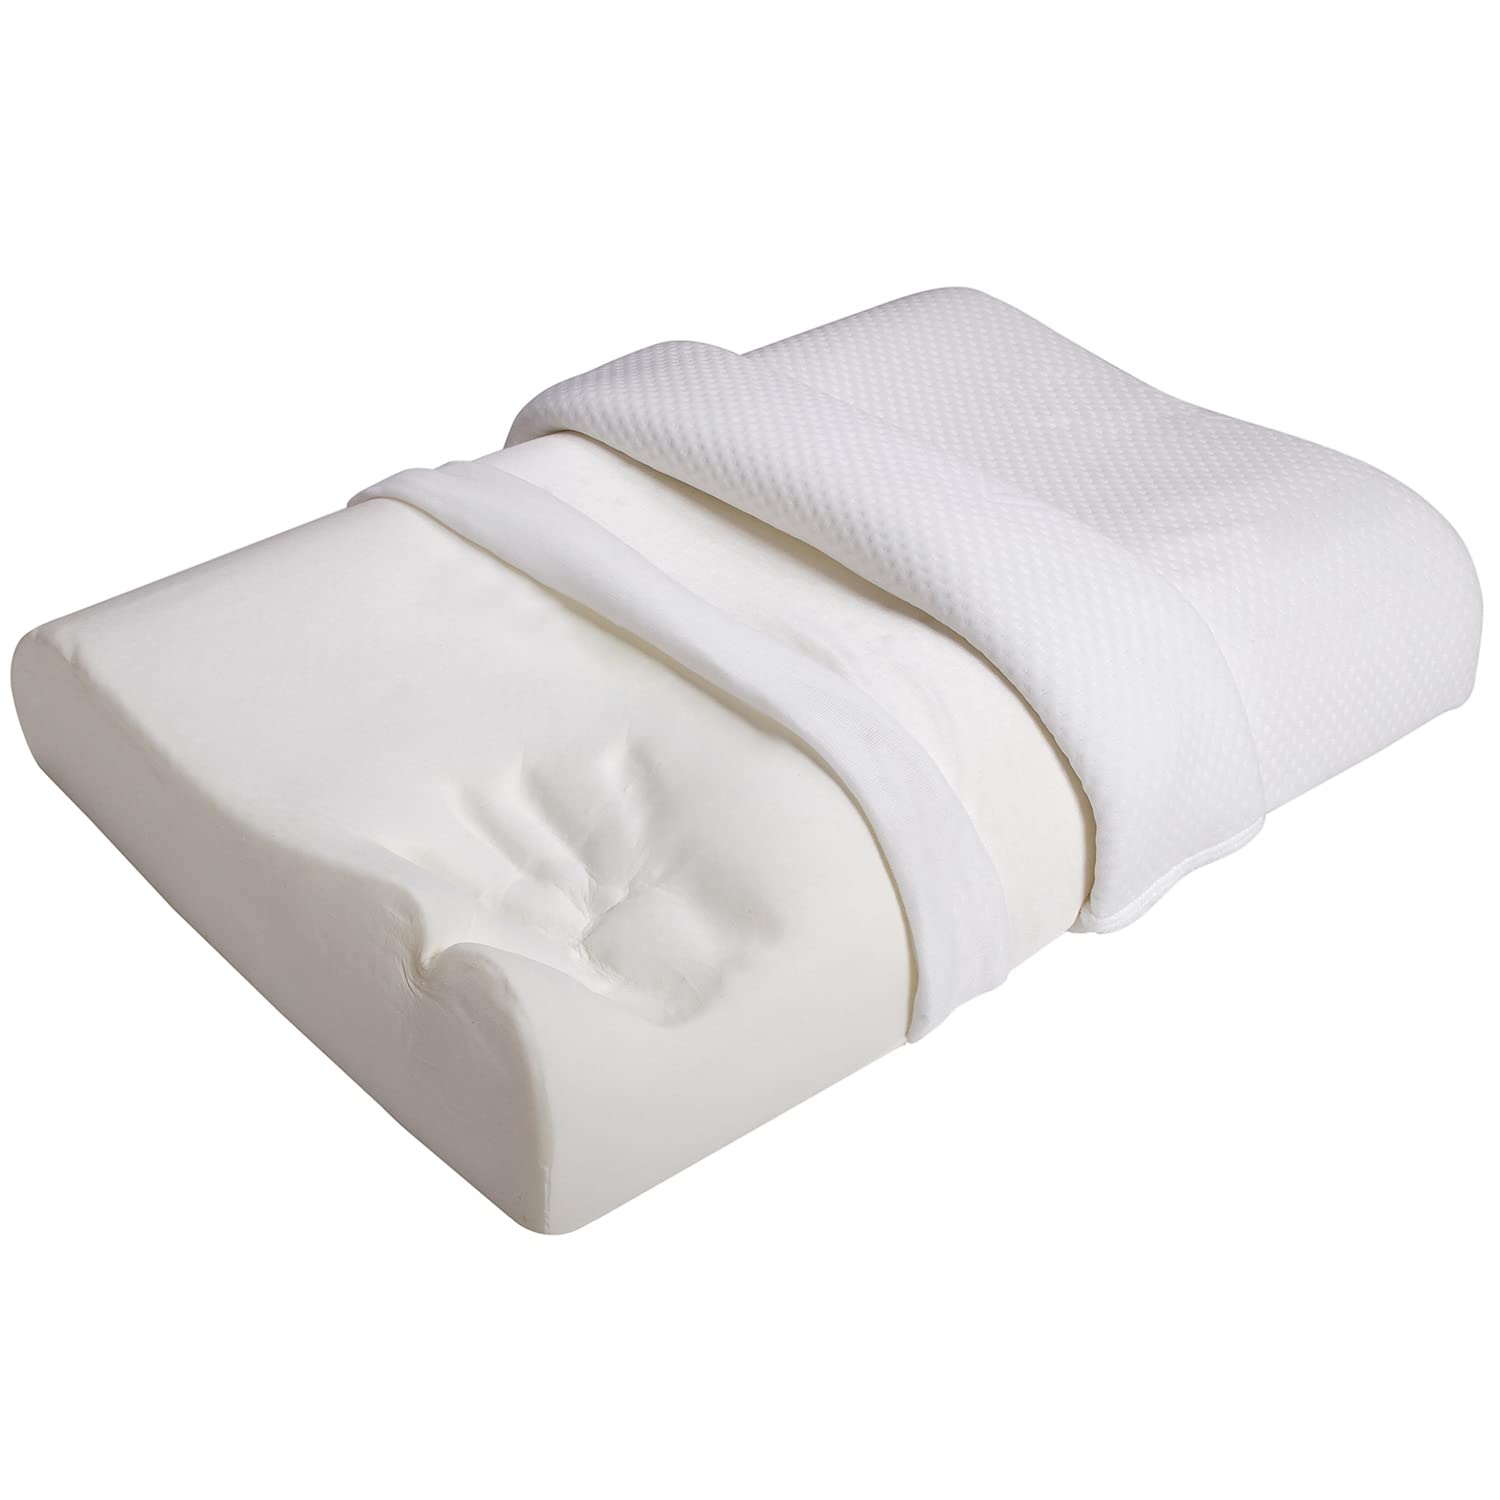 Contoured Orthopedic Memory Foam Pillow with Cooling Gel